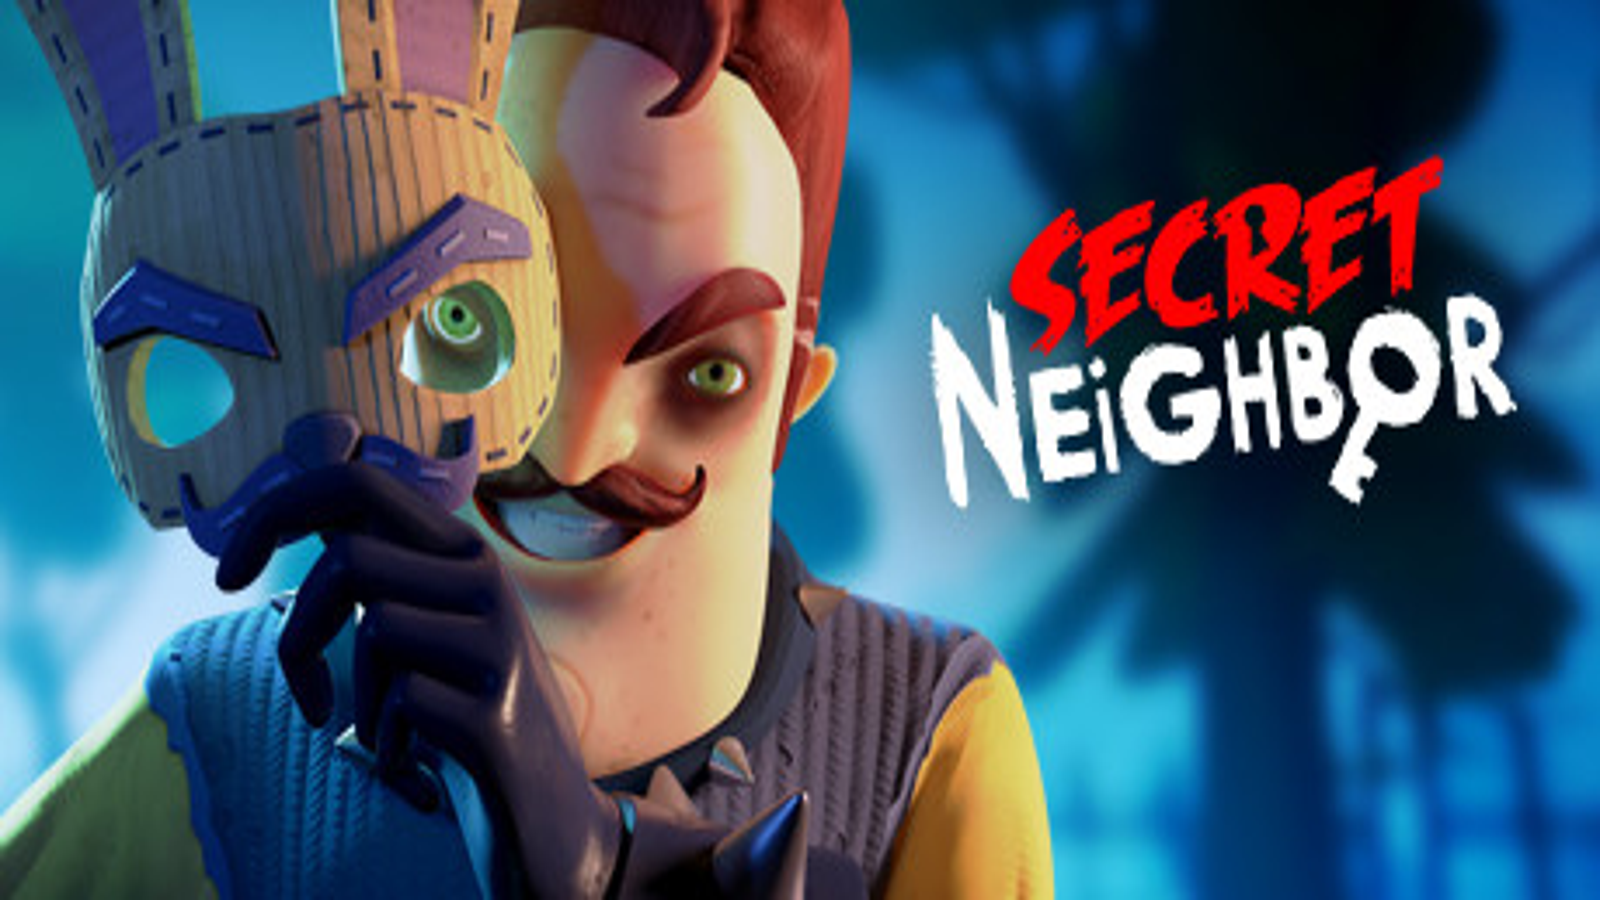 Hello Secret Neighbor | Steam Key | PC Game | Email Delivery